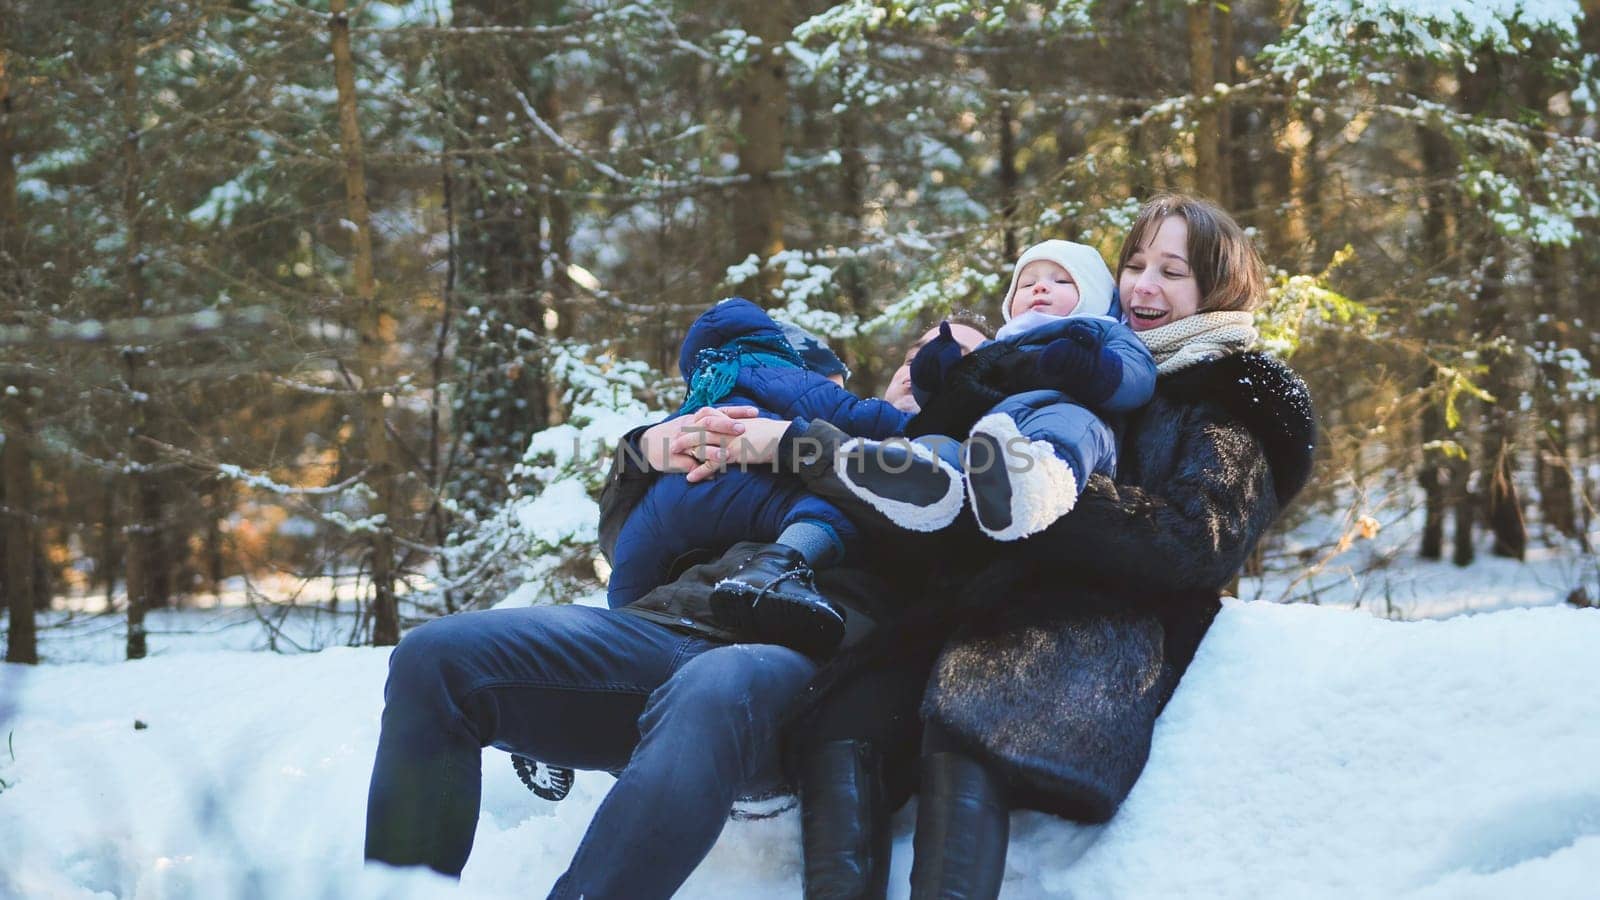 A happy family falls into a snow drift in the woods in winter